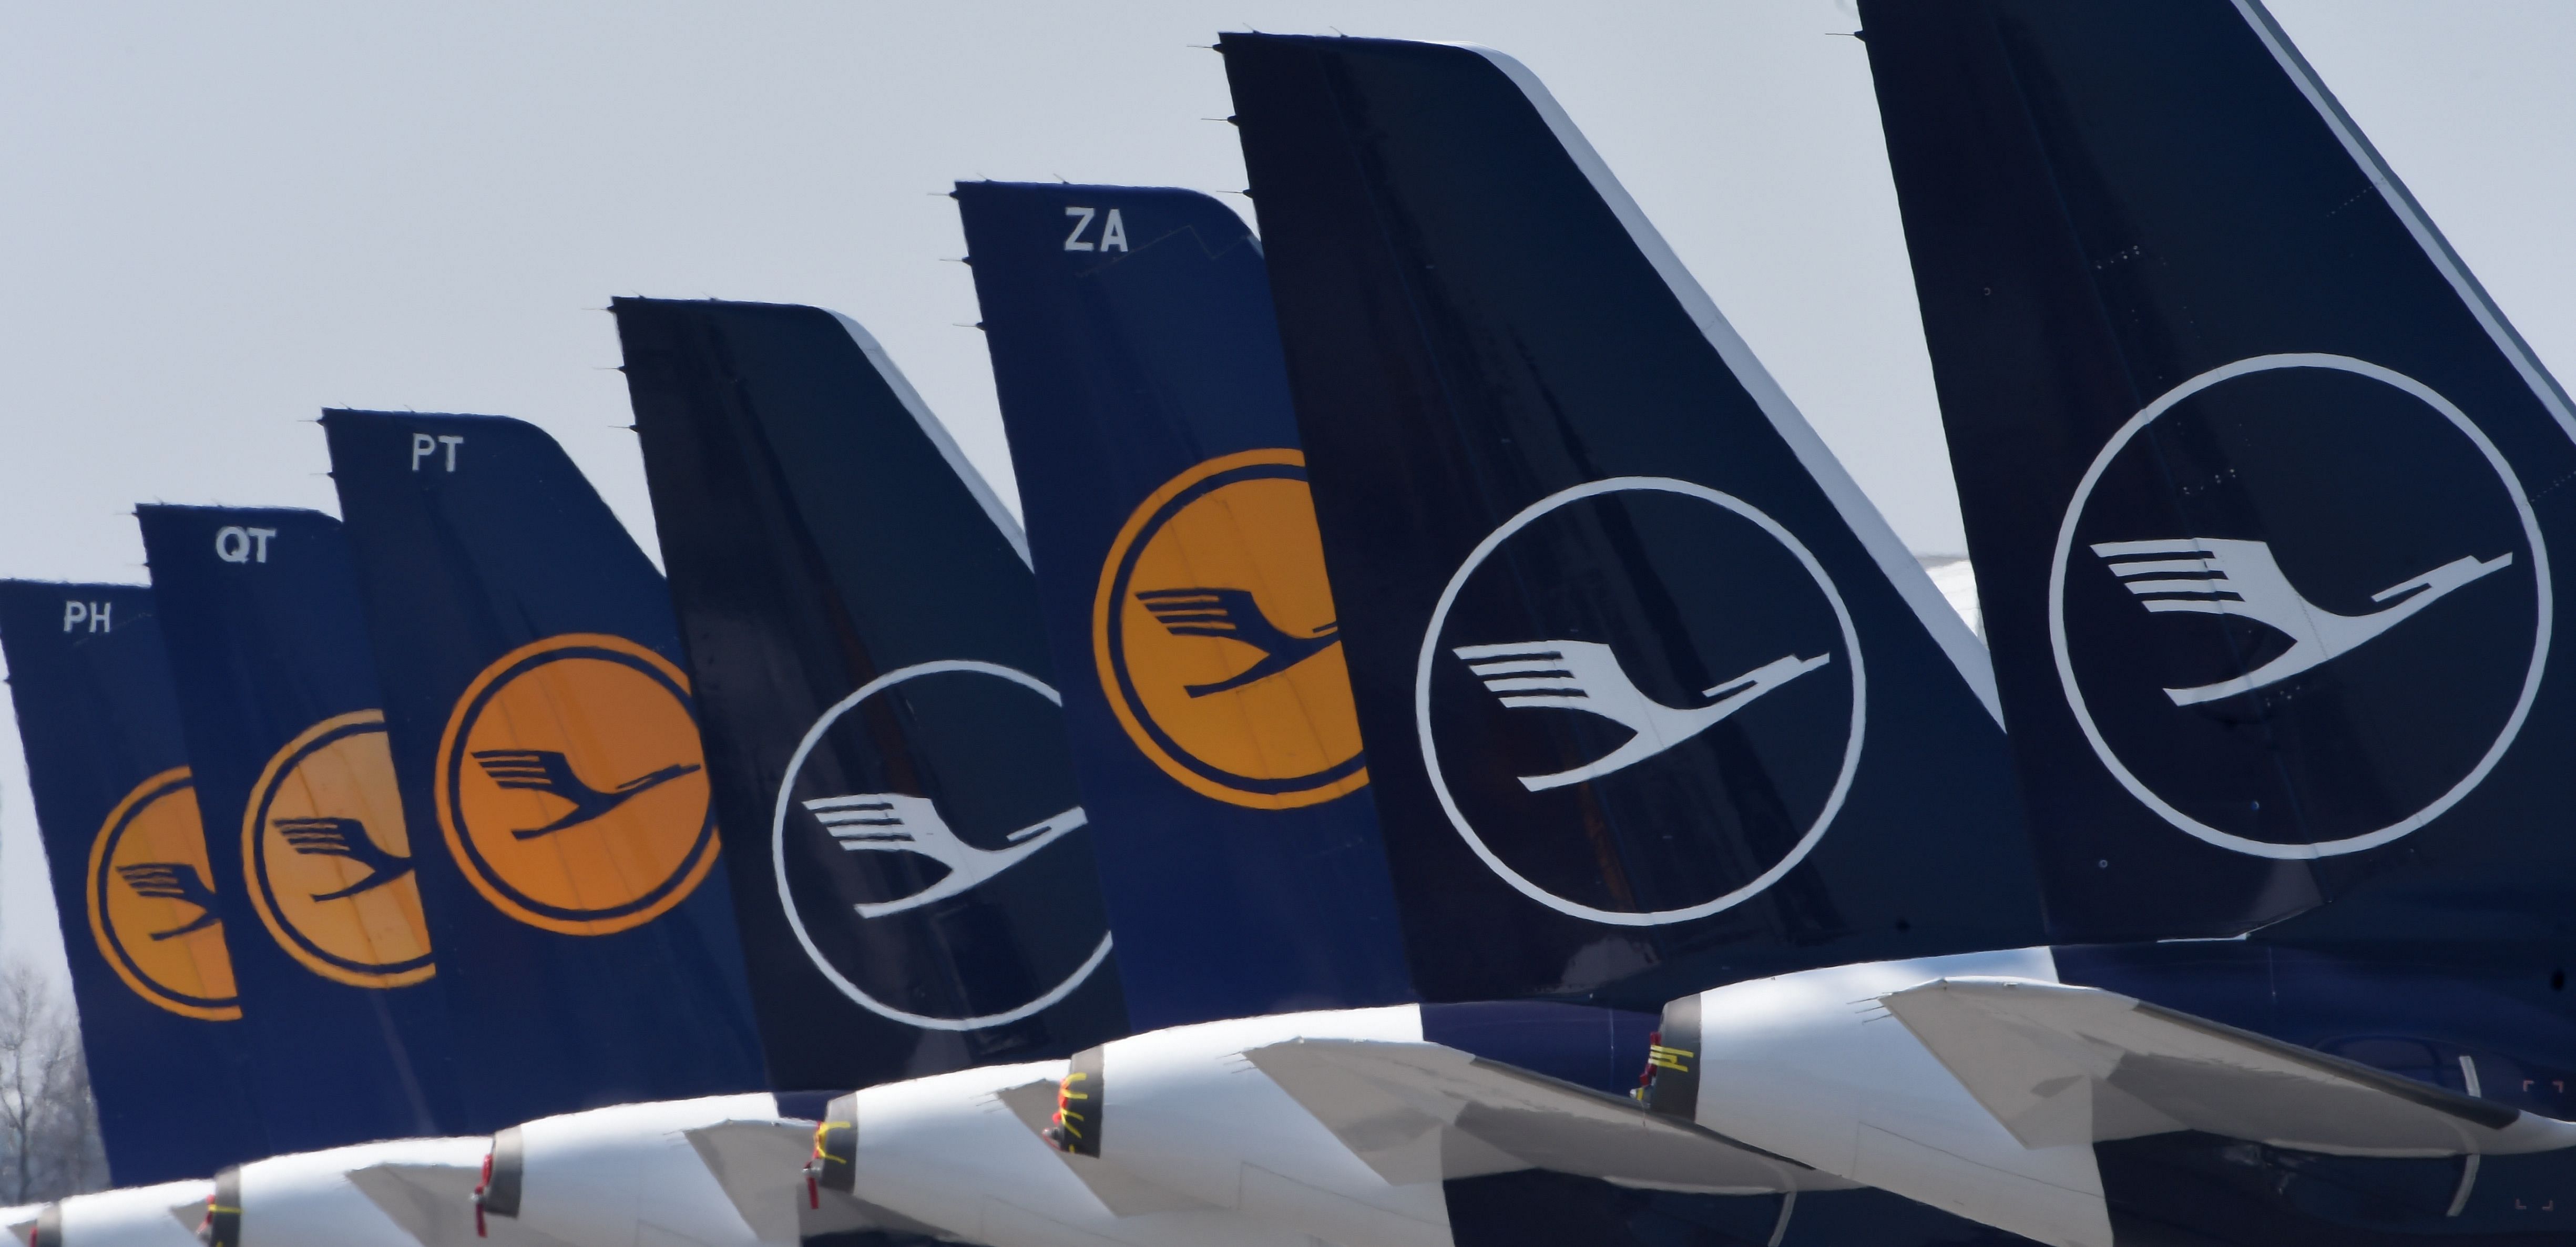 In this file photo taken on April 1, 2020 Planes of the German airline Lufthansa are parked at the "Franz-Josef-Strauss" airport in Munich, southern Germany. (Credit: AFP Photo)